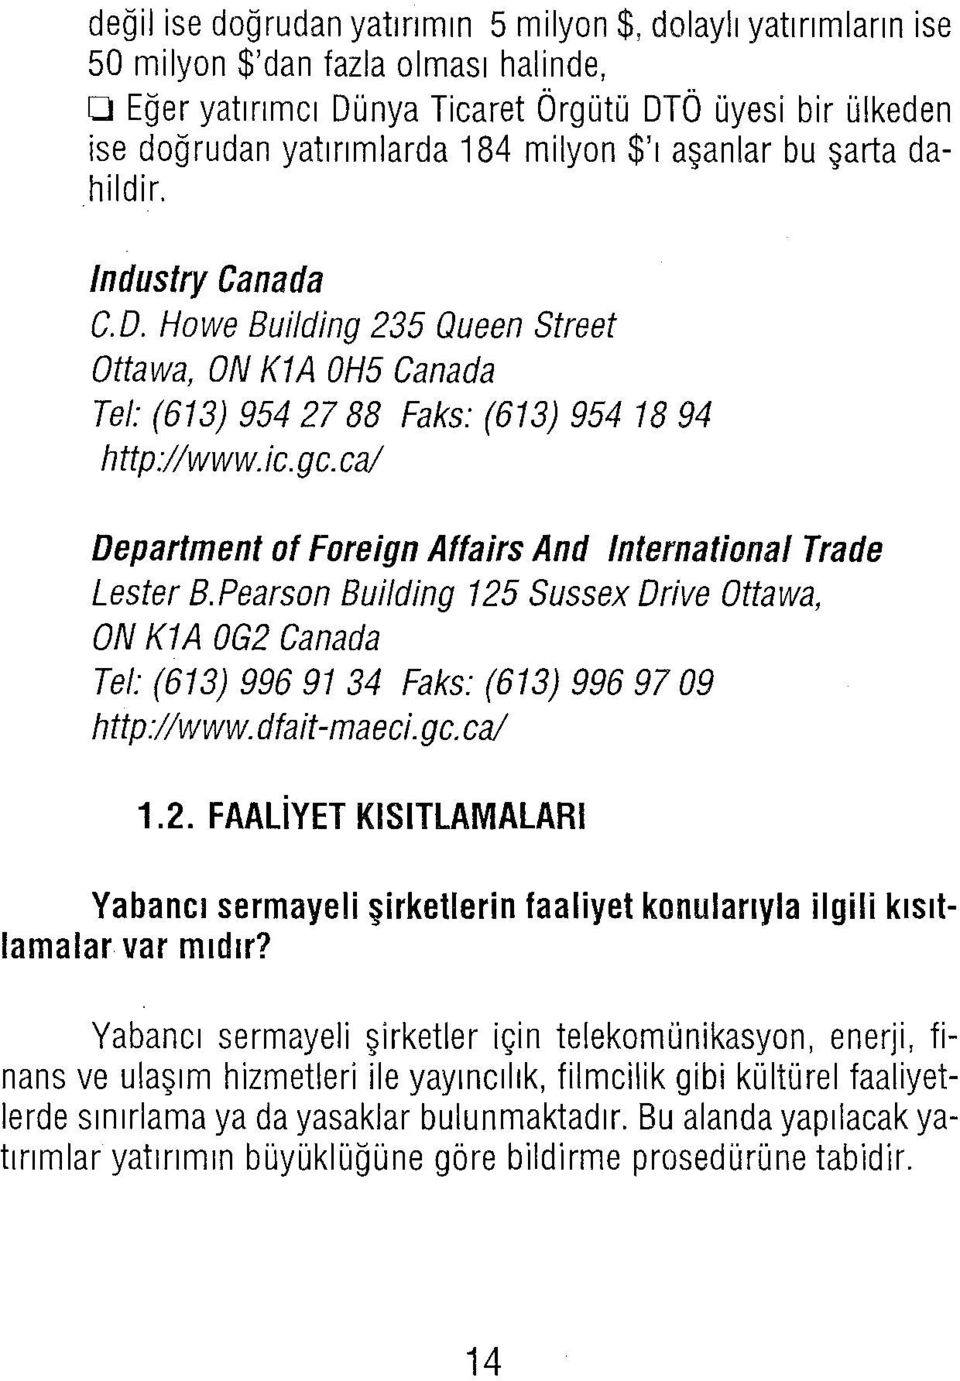 ca/ Department of Foreign Affairs And International Trade Lester B.Pearson Bui/ding 125 Sussex Drive Ottawa, ON K1 A OG2 Canada Tel: (613) 99691 34 Faks: (613) 9969709 http://www.dfait-maeci.gc.ca/ 1.